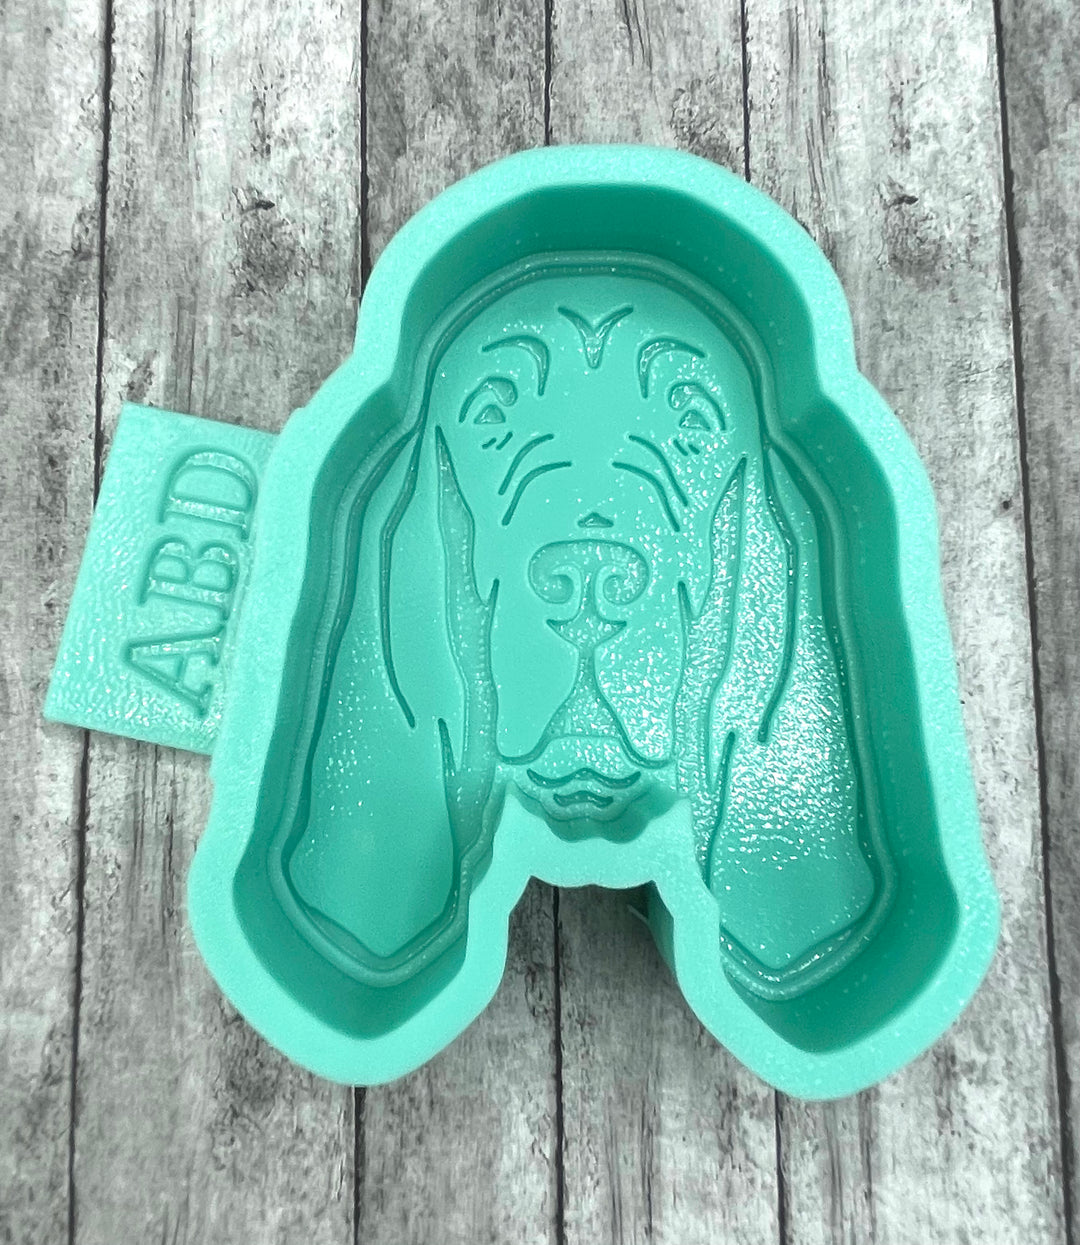 Bloodhound Silicone Mold